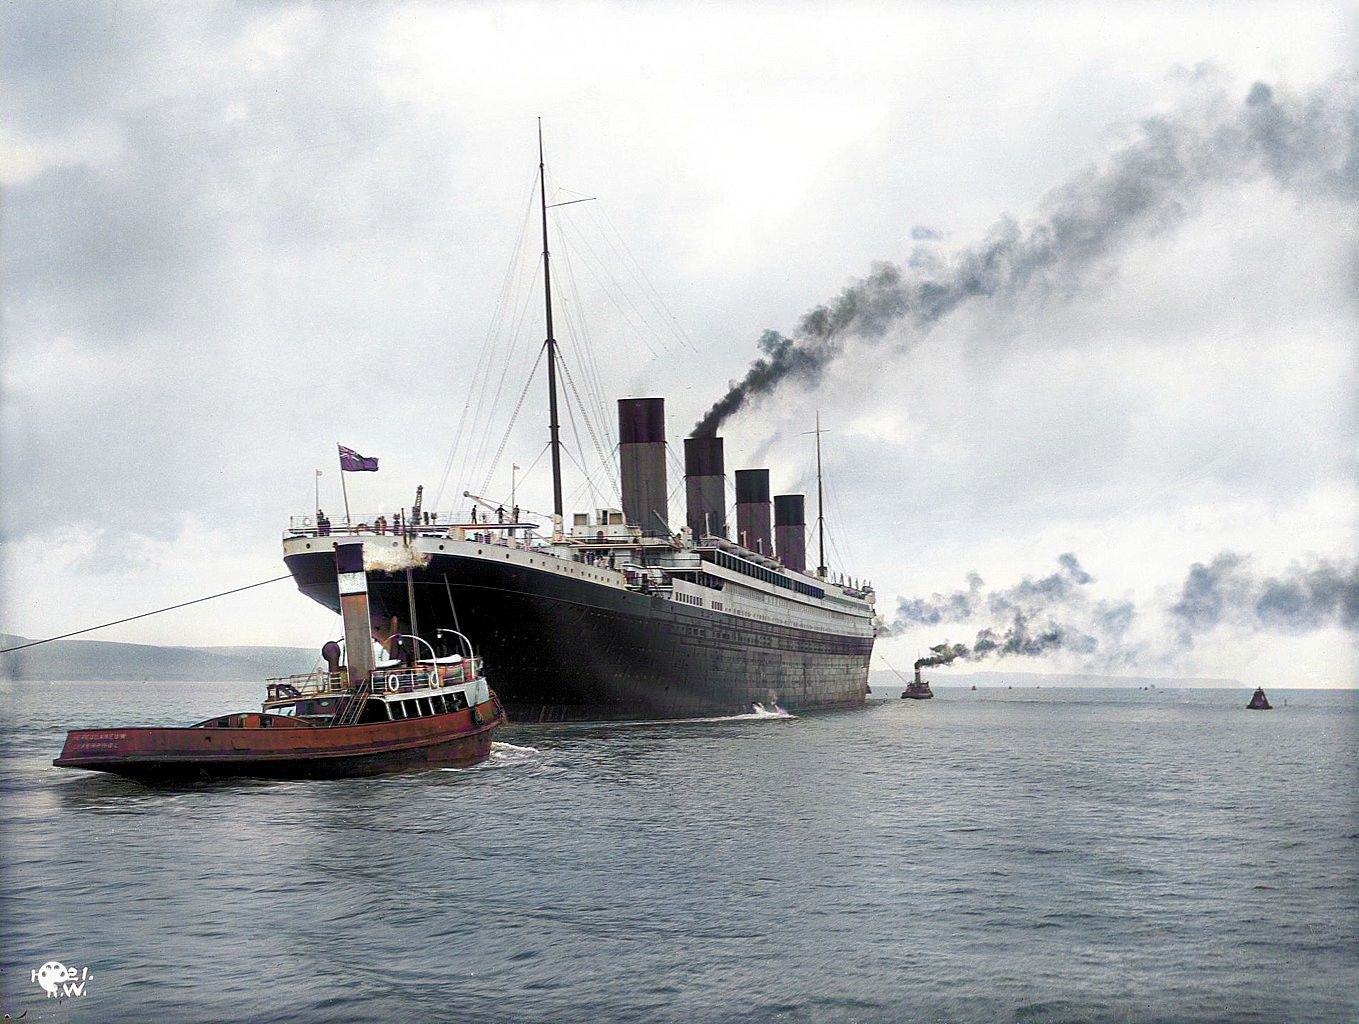 RMS Titanic leaving Belfast for her sea trials on April 2, 1912